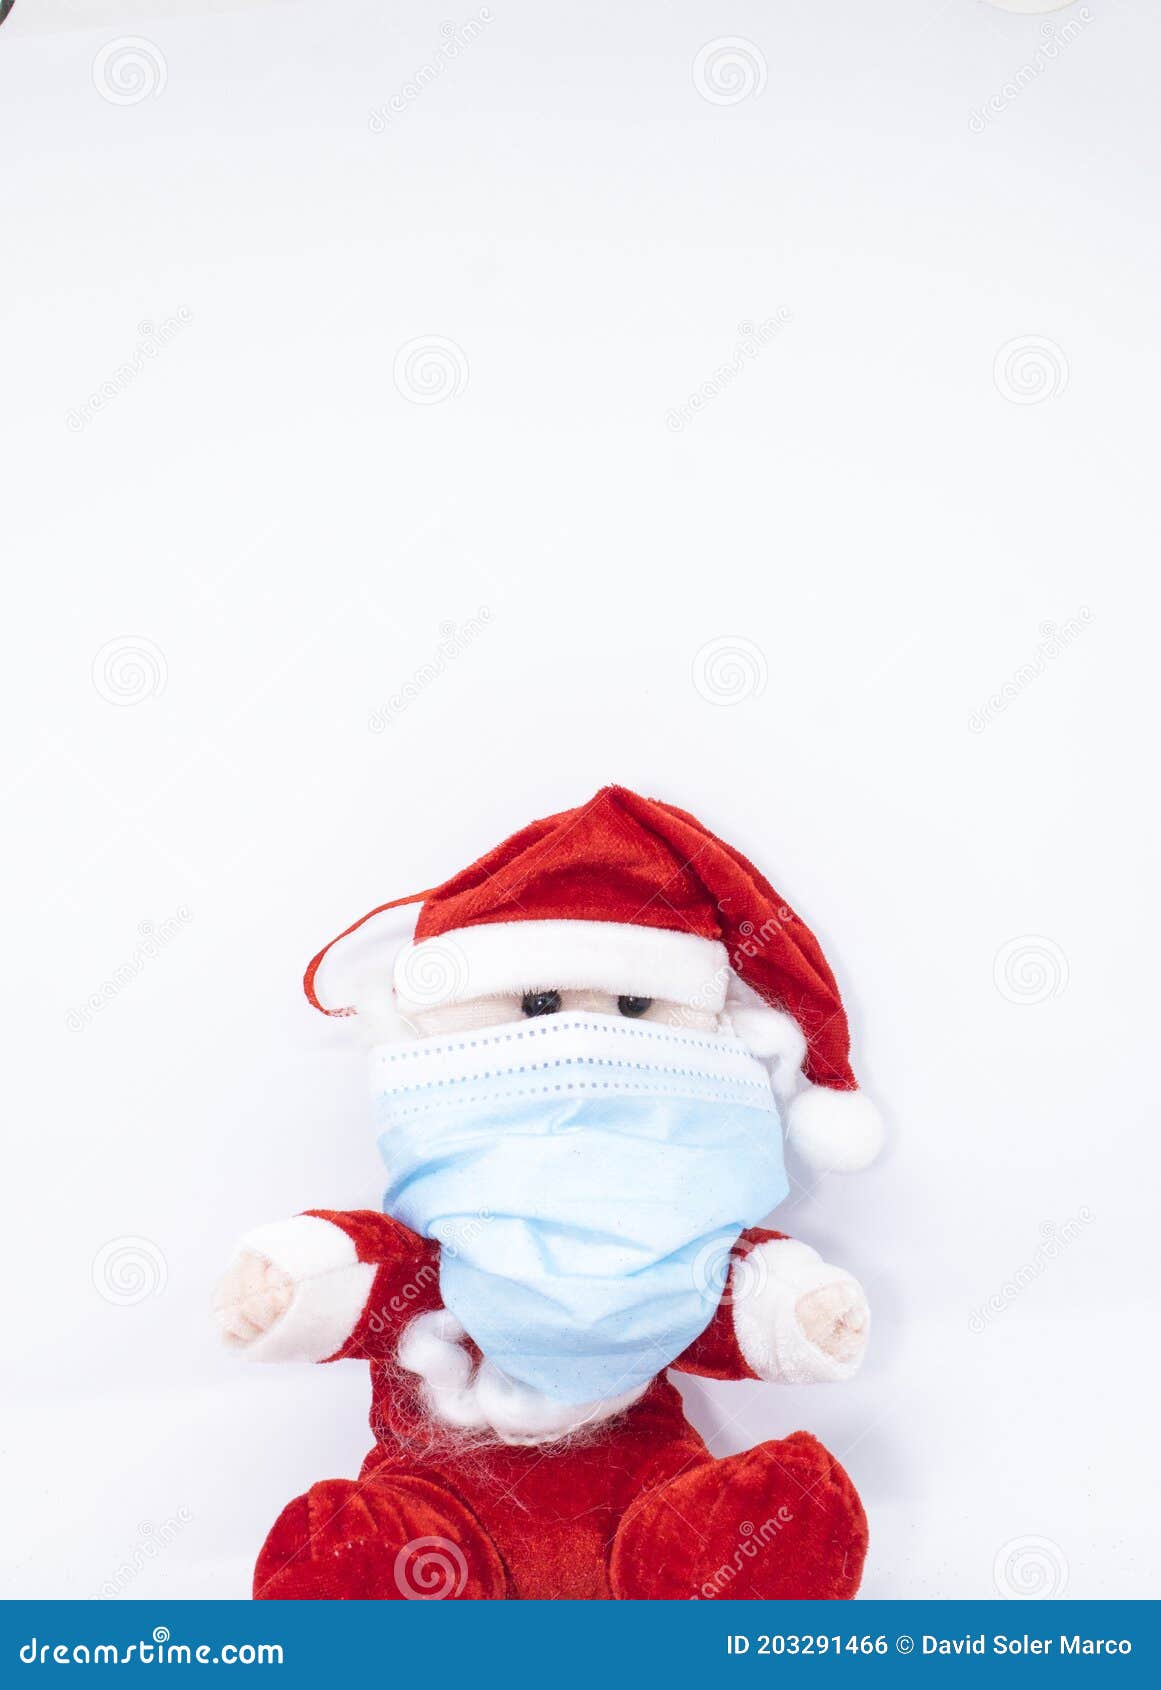 homemade cotton santa claus play with a covid-19 or coronavirus protection mask